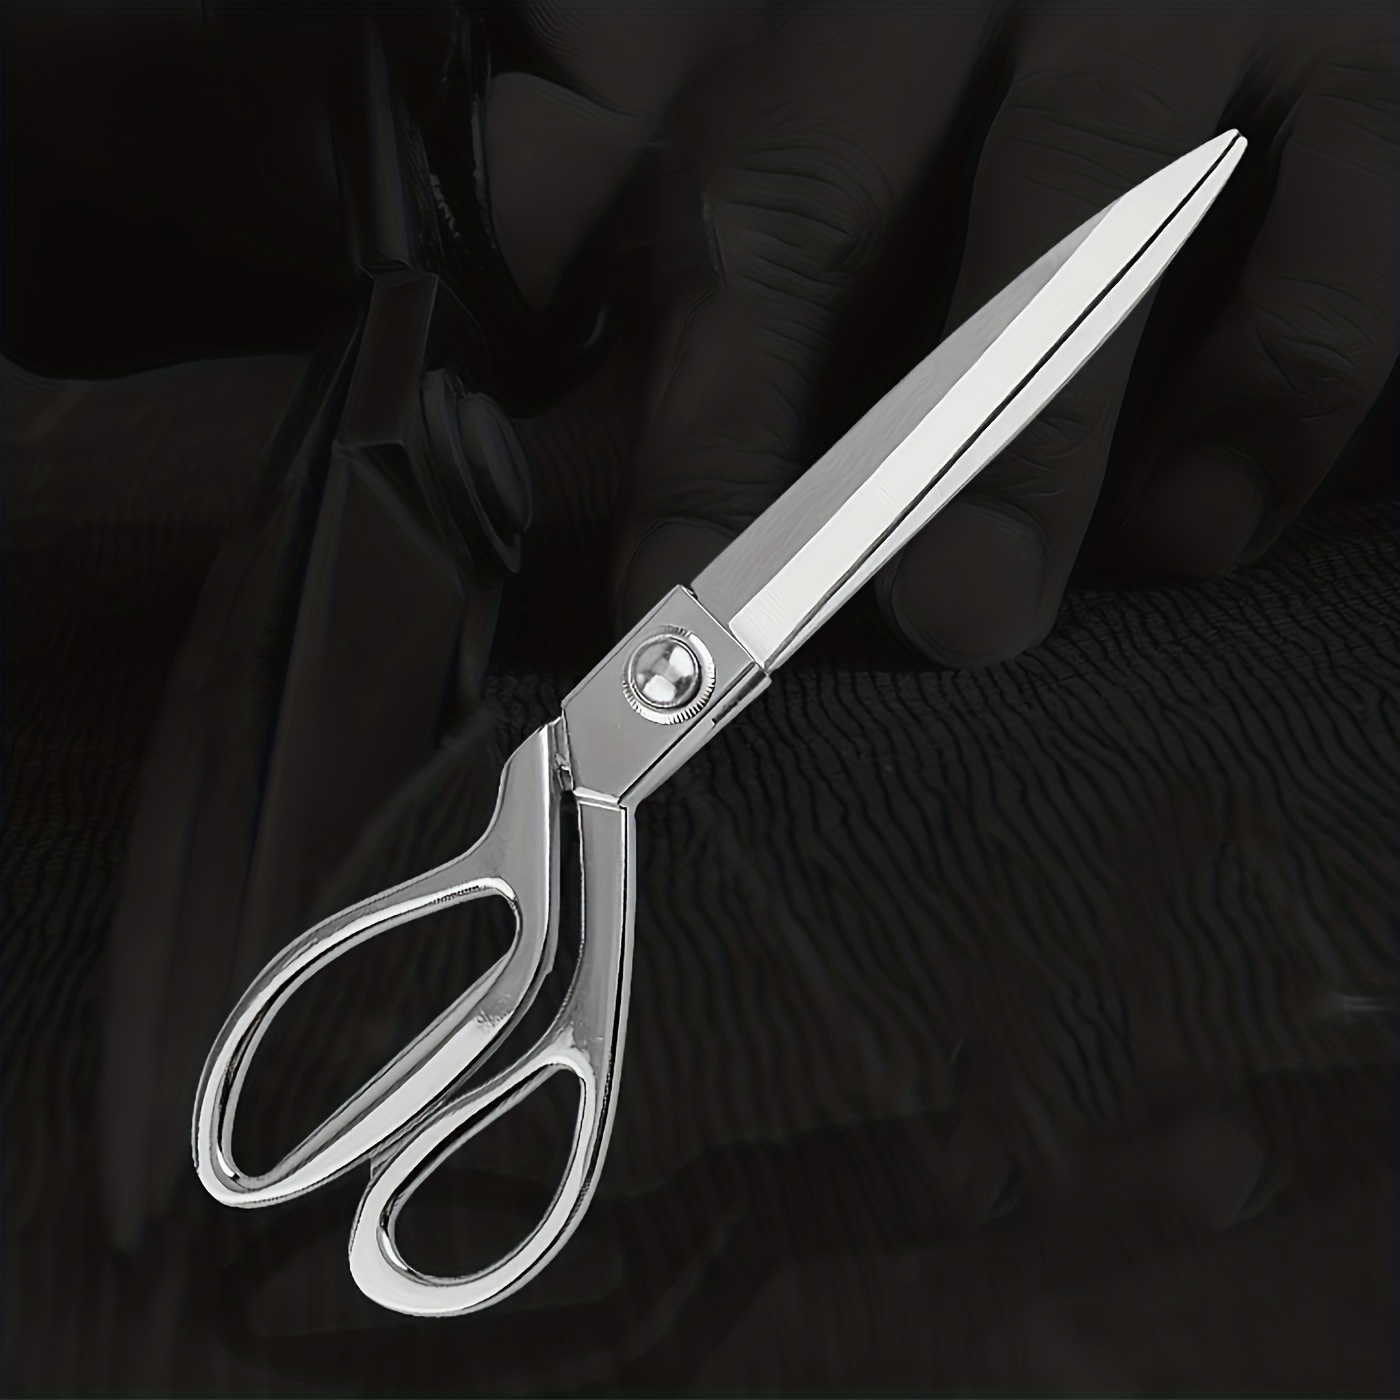 

1 Pair Of Scissors, Stainless Steel Silvery Scissors For Office, Home And Sewing, 7.8inch